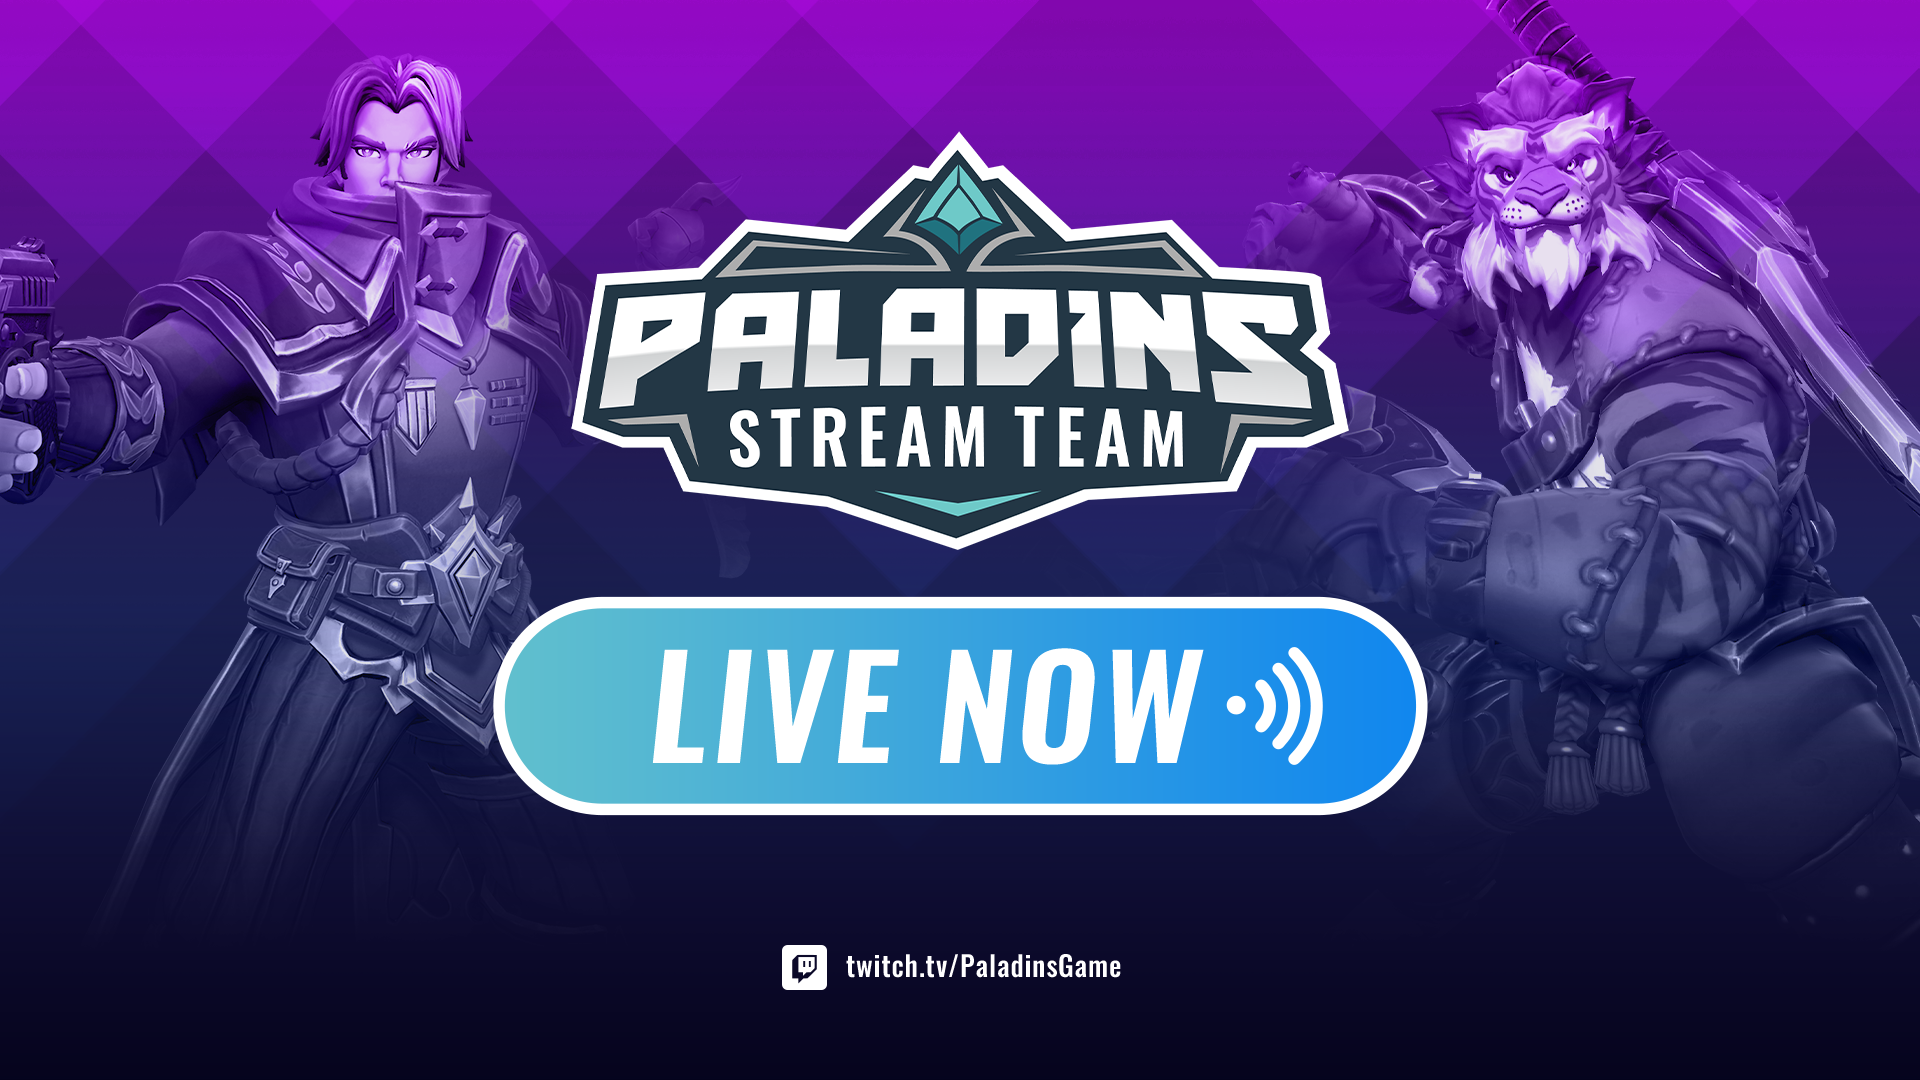 The Game on "The Paladins Stream Team is live on Twitch! Go give @tpdmagic shout out in chat watch some fun Paladins action. https://t.co/aettJXSuo0 https://t.co/qb9xIx64xK" / Twitter